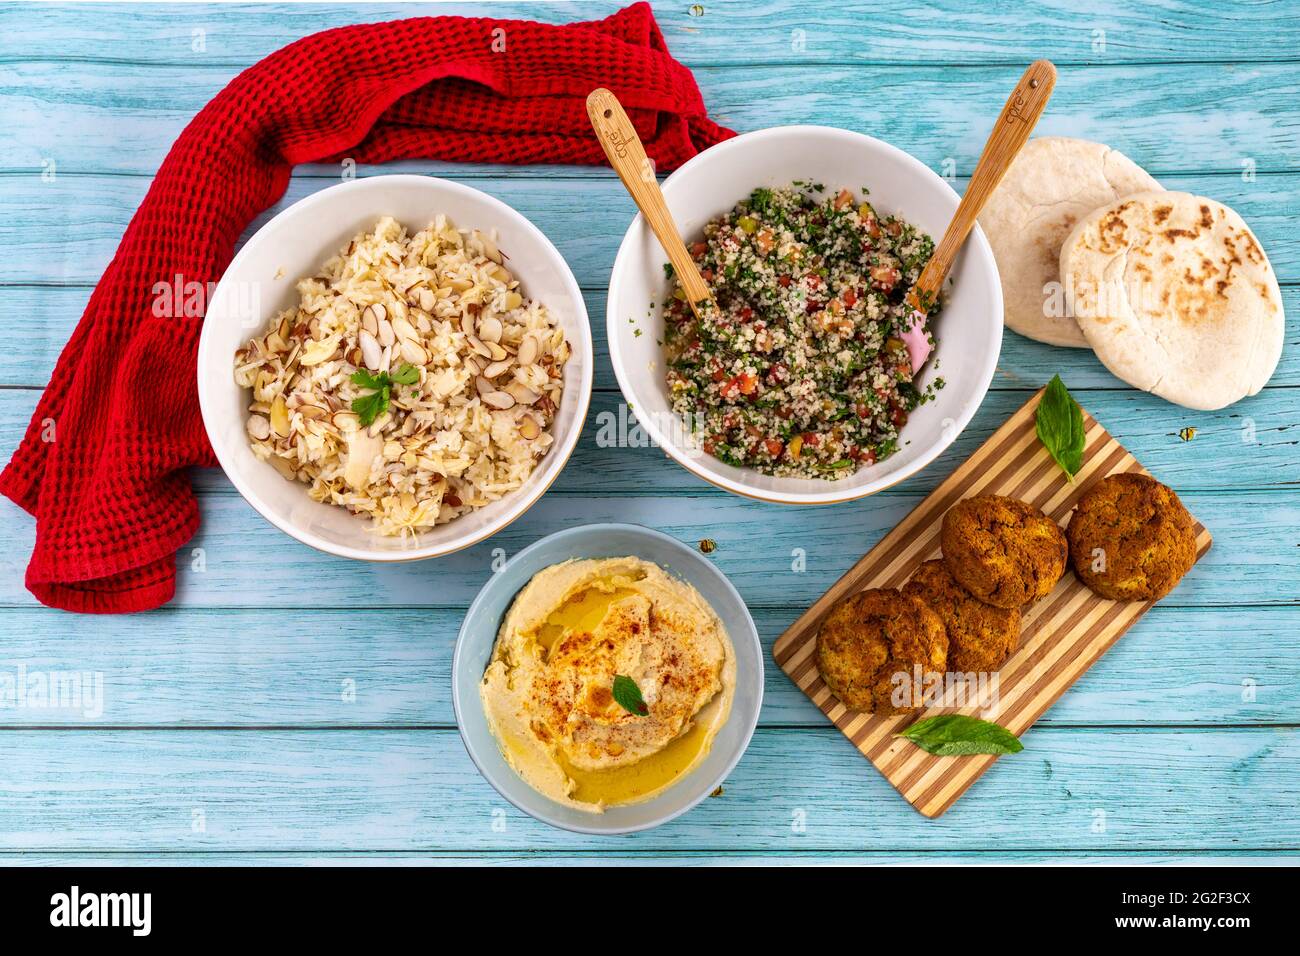 Assorted of lebanese dish, traditional food Stock Photo